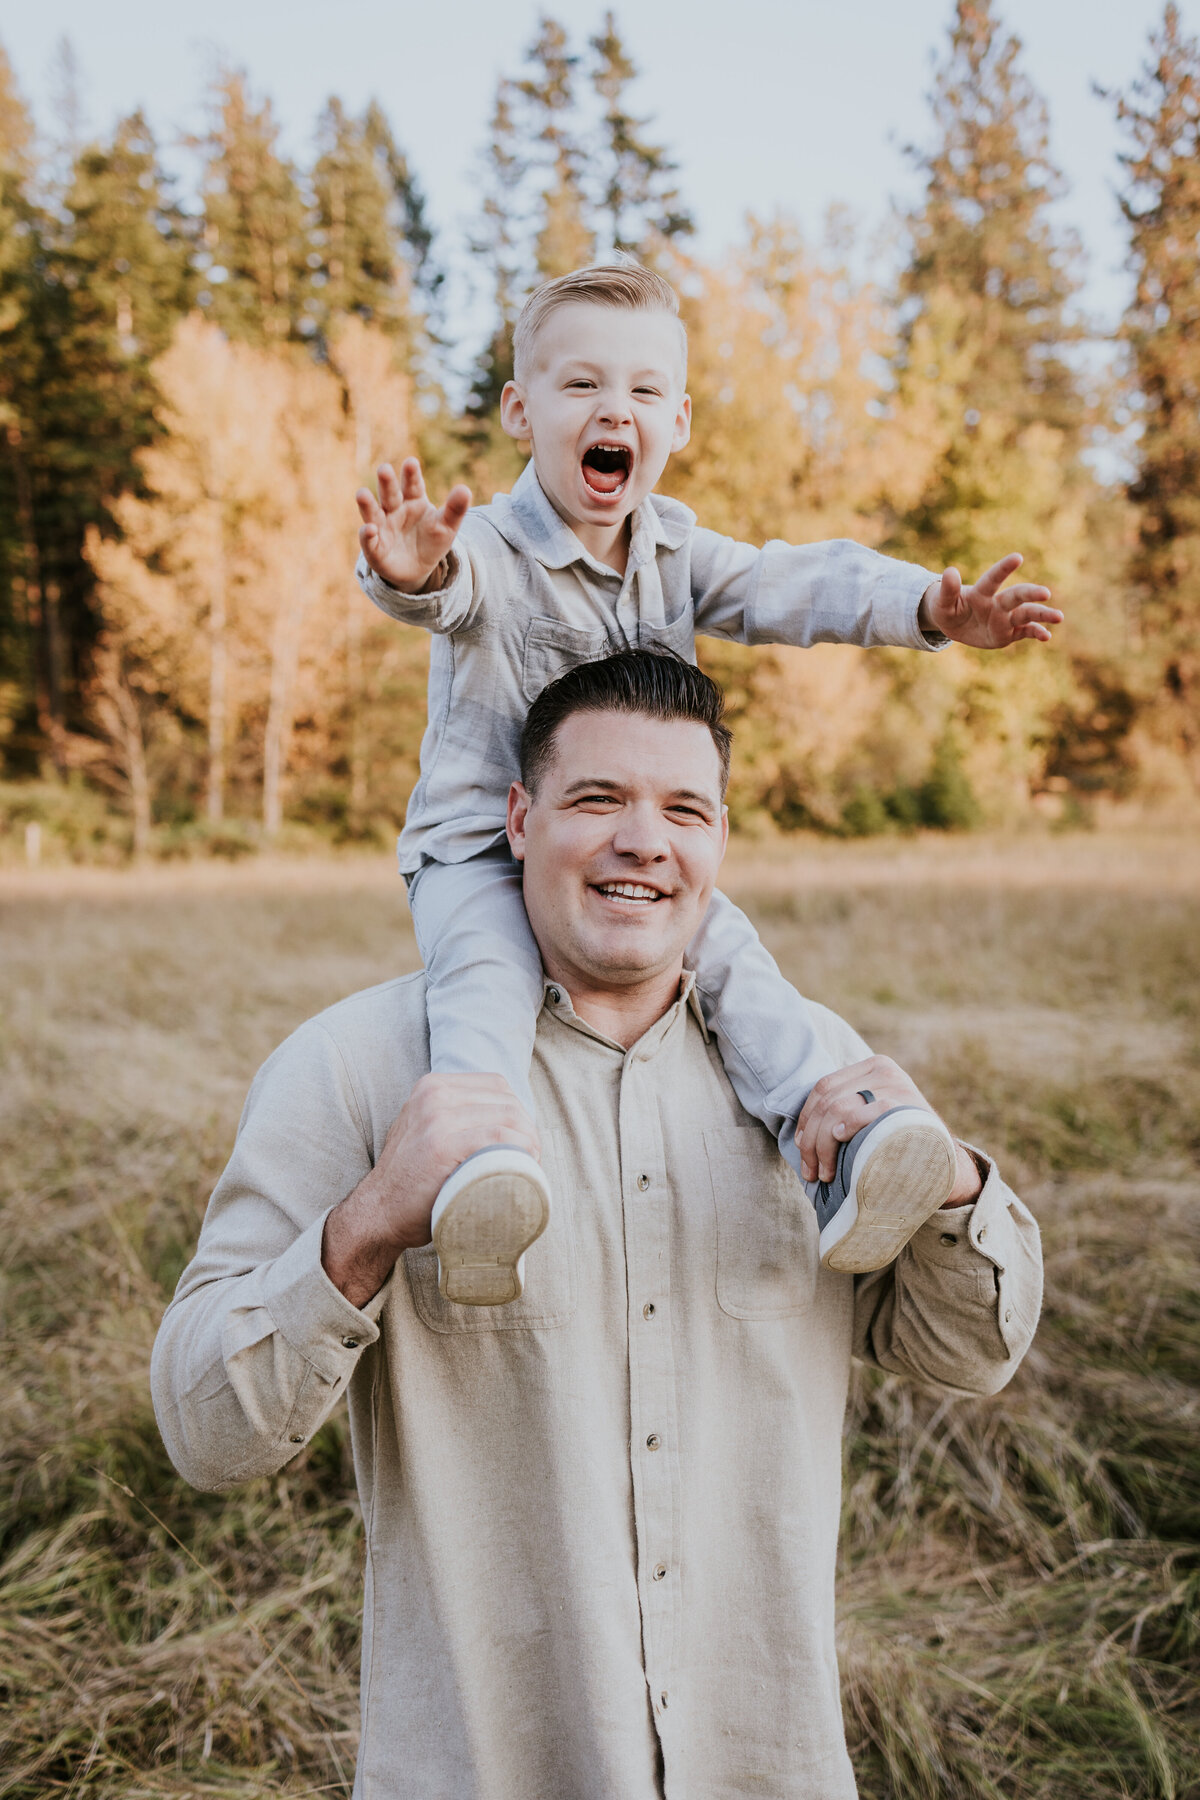 Dad holds young son on shoulders while both give the camera huge smiles.